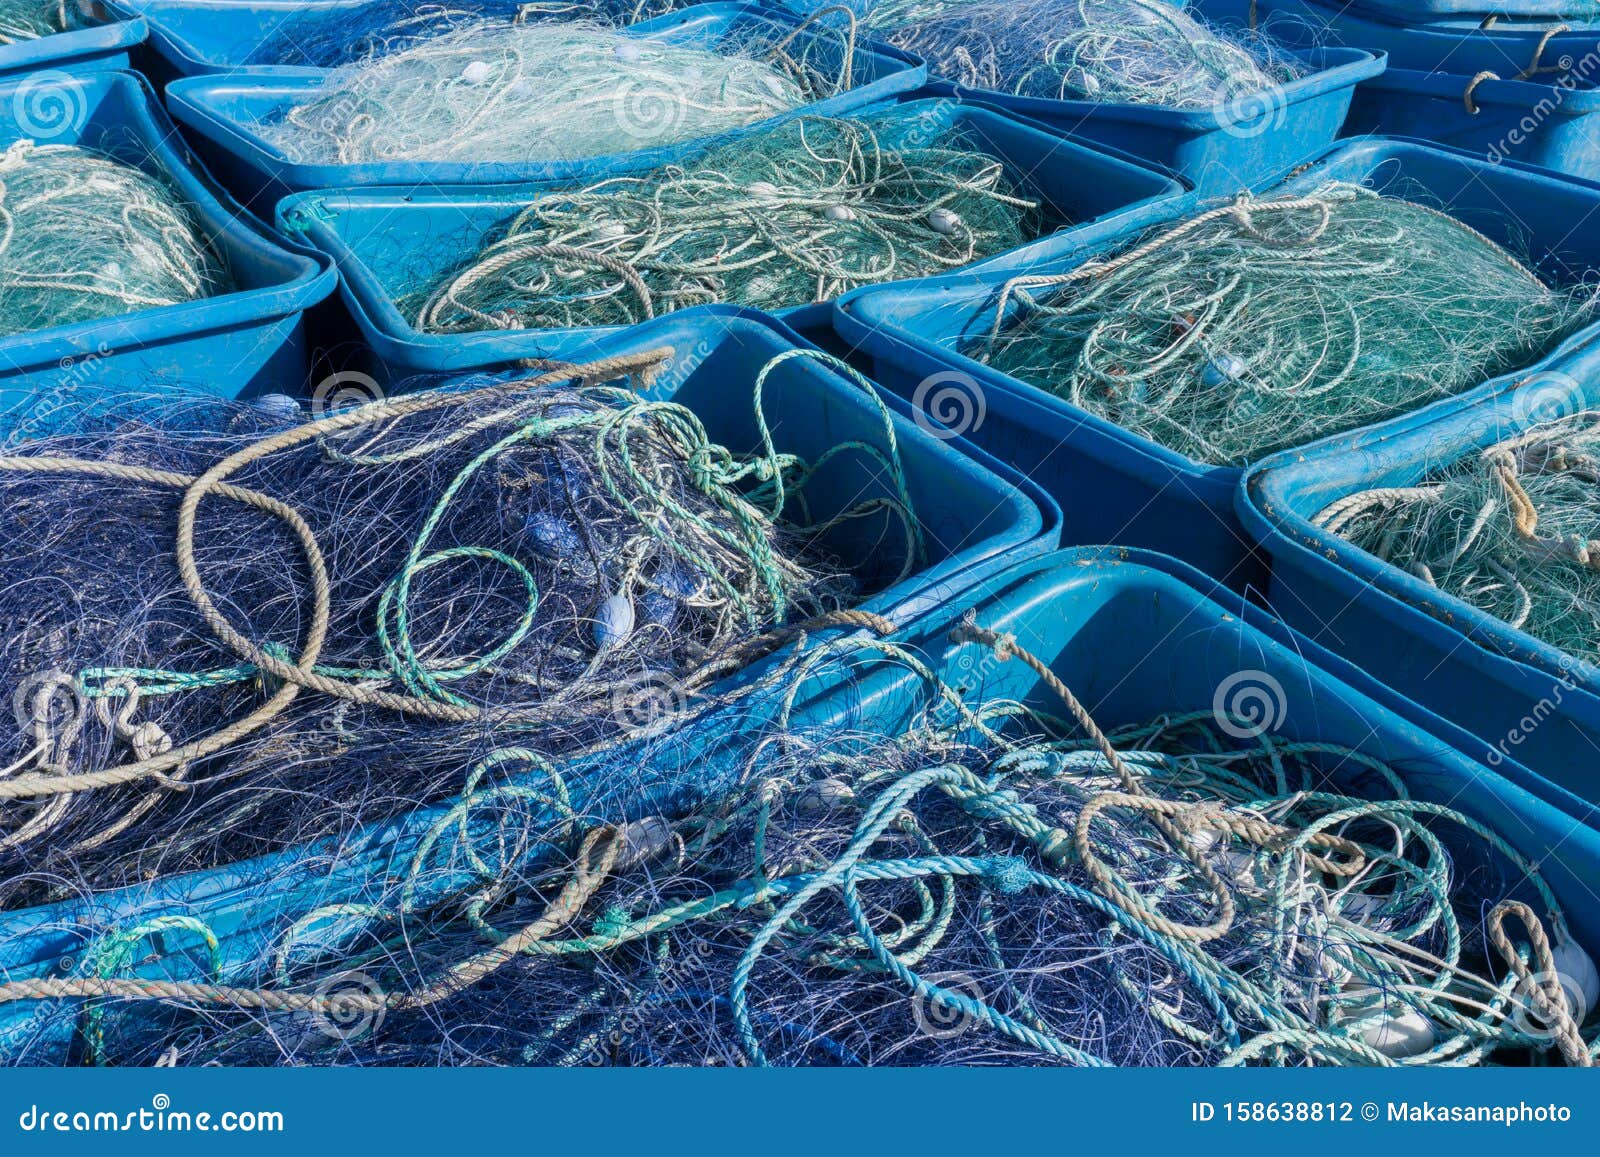 Large Plastic Tubs Filled with Industrial Size Fishing and Trawling Nets  Used in the Offshore Fishing Industry Stock Photo - Image of lines, string:  158638812